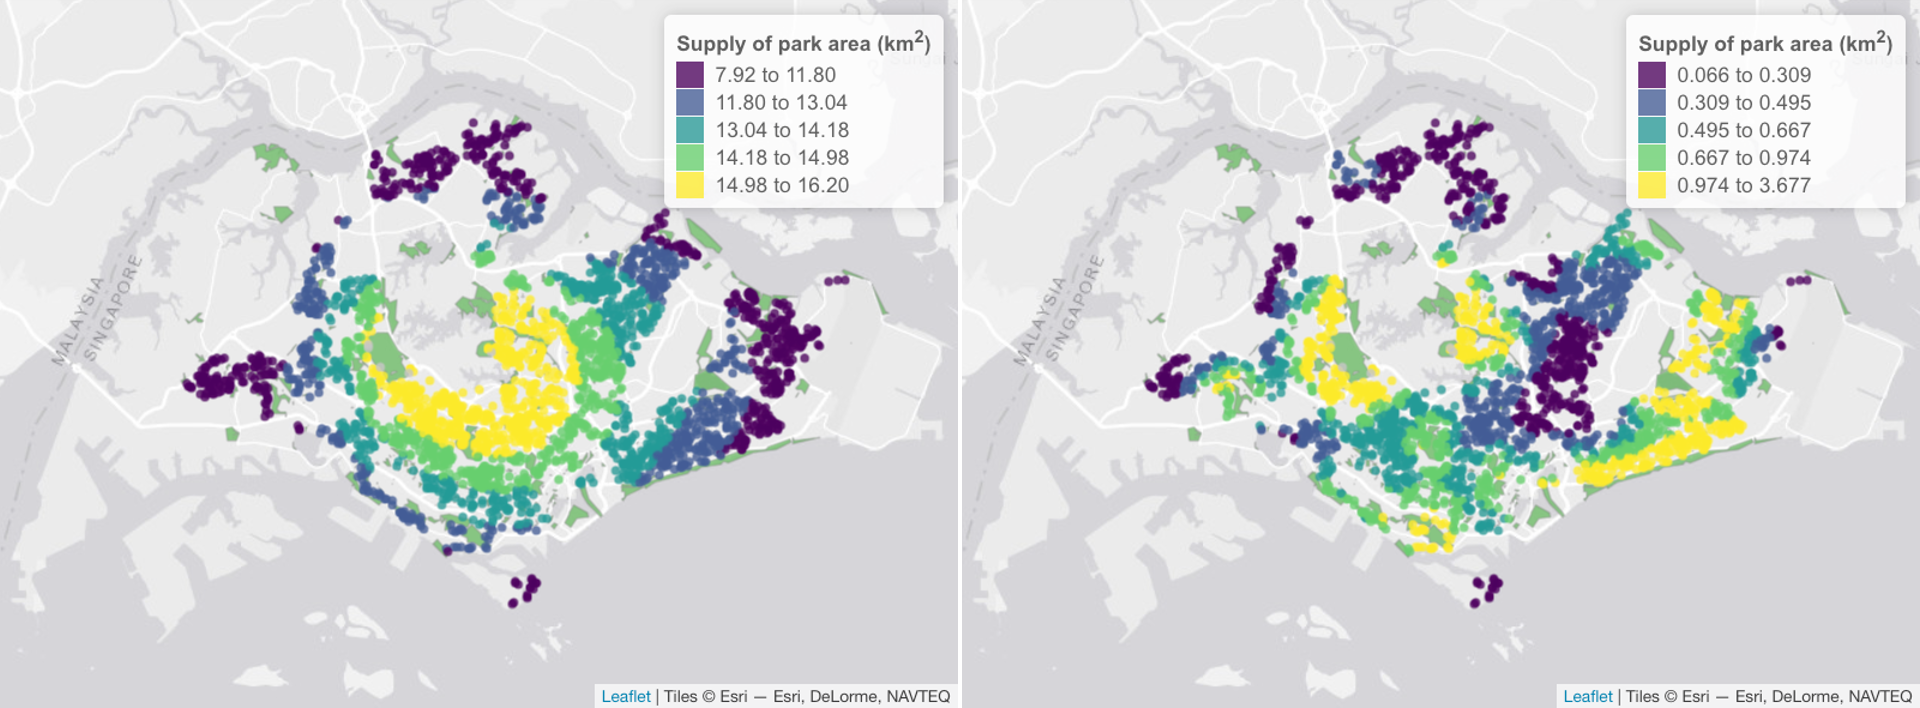 Screenshot: Examples showing the supply of OSM park area to residential buildings in Singapore for the year 2020 when the value of Coefficient c is 0.1 (left panel) and 1 (right panel). Each building is denoted as a pount (a random subset is shown). The color palette for the buildings (points) is binned according to the quantile values.